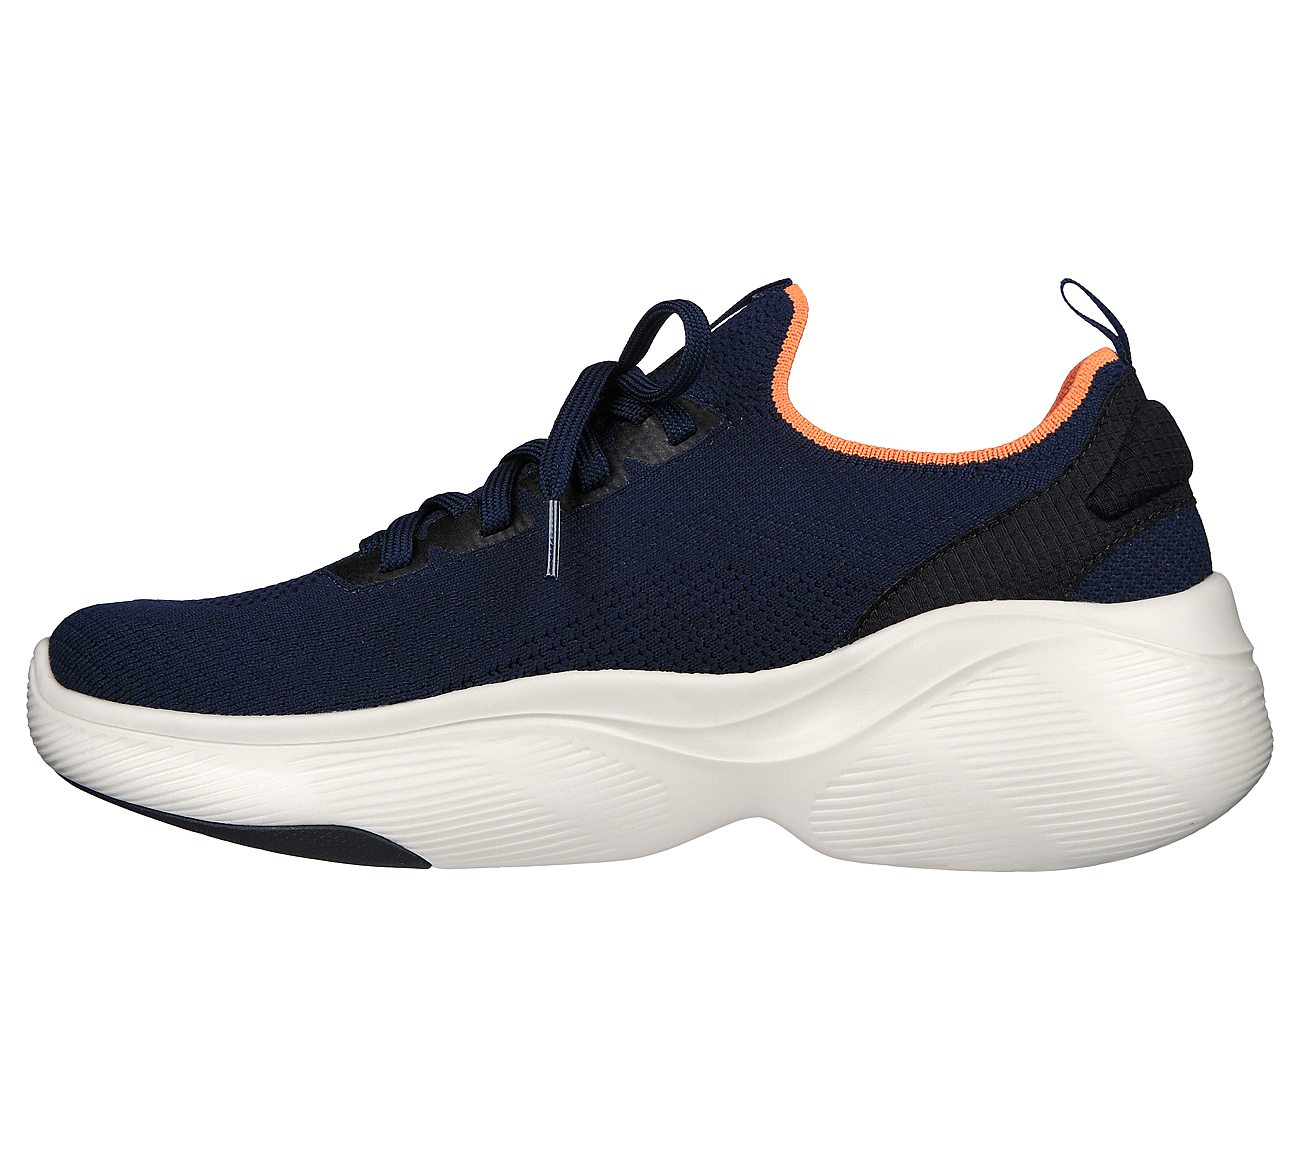 ARCH FIT INFINITY - STORMLIGH, NAVY/ORANGE Footwear Left View